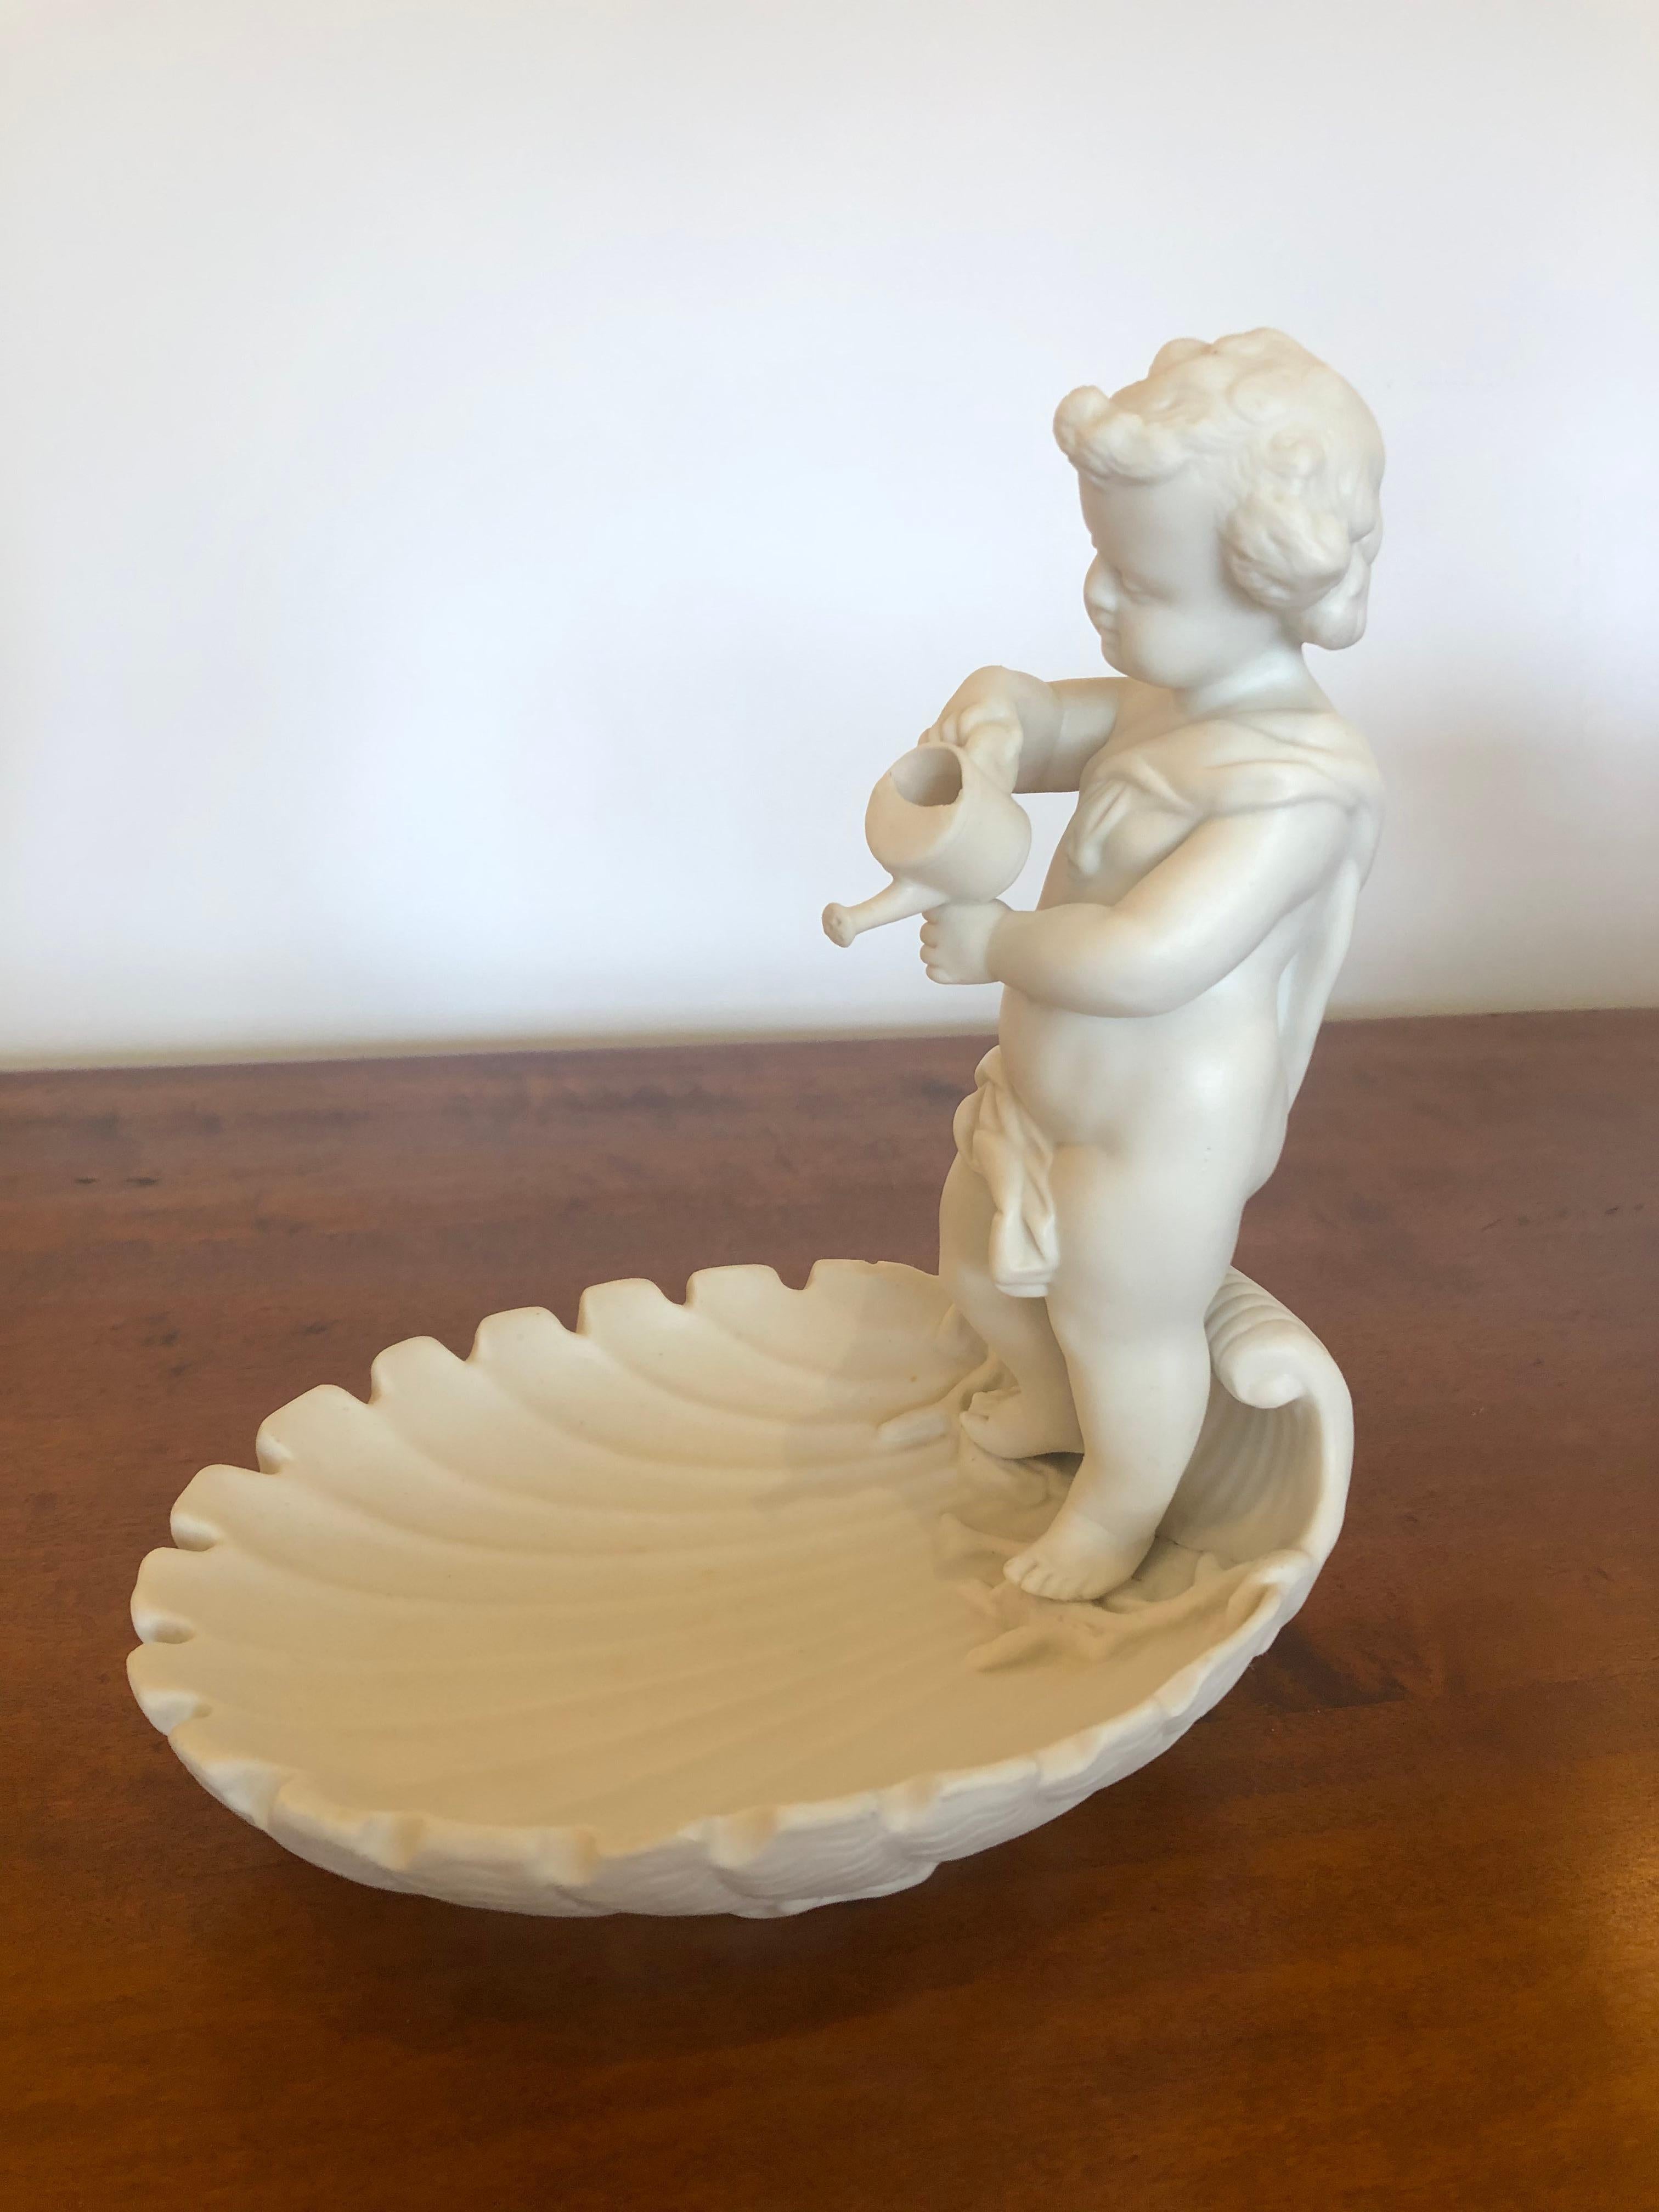 Magical Parian Porcelain Shell Motif Dish with Sculptural Putti For Sale 2